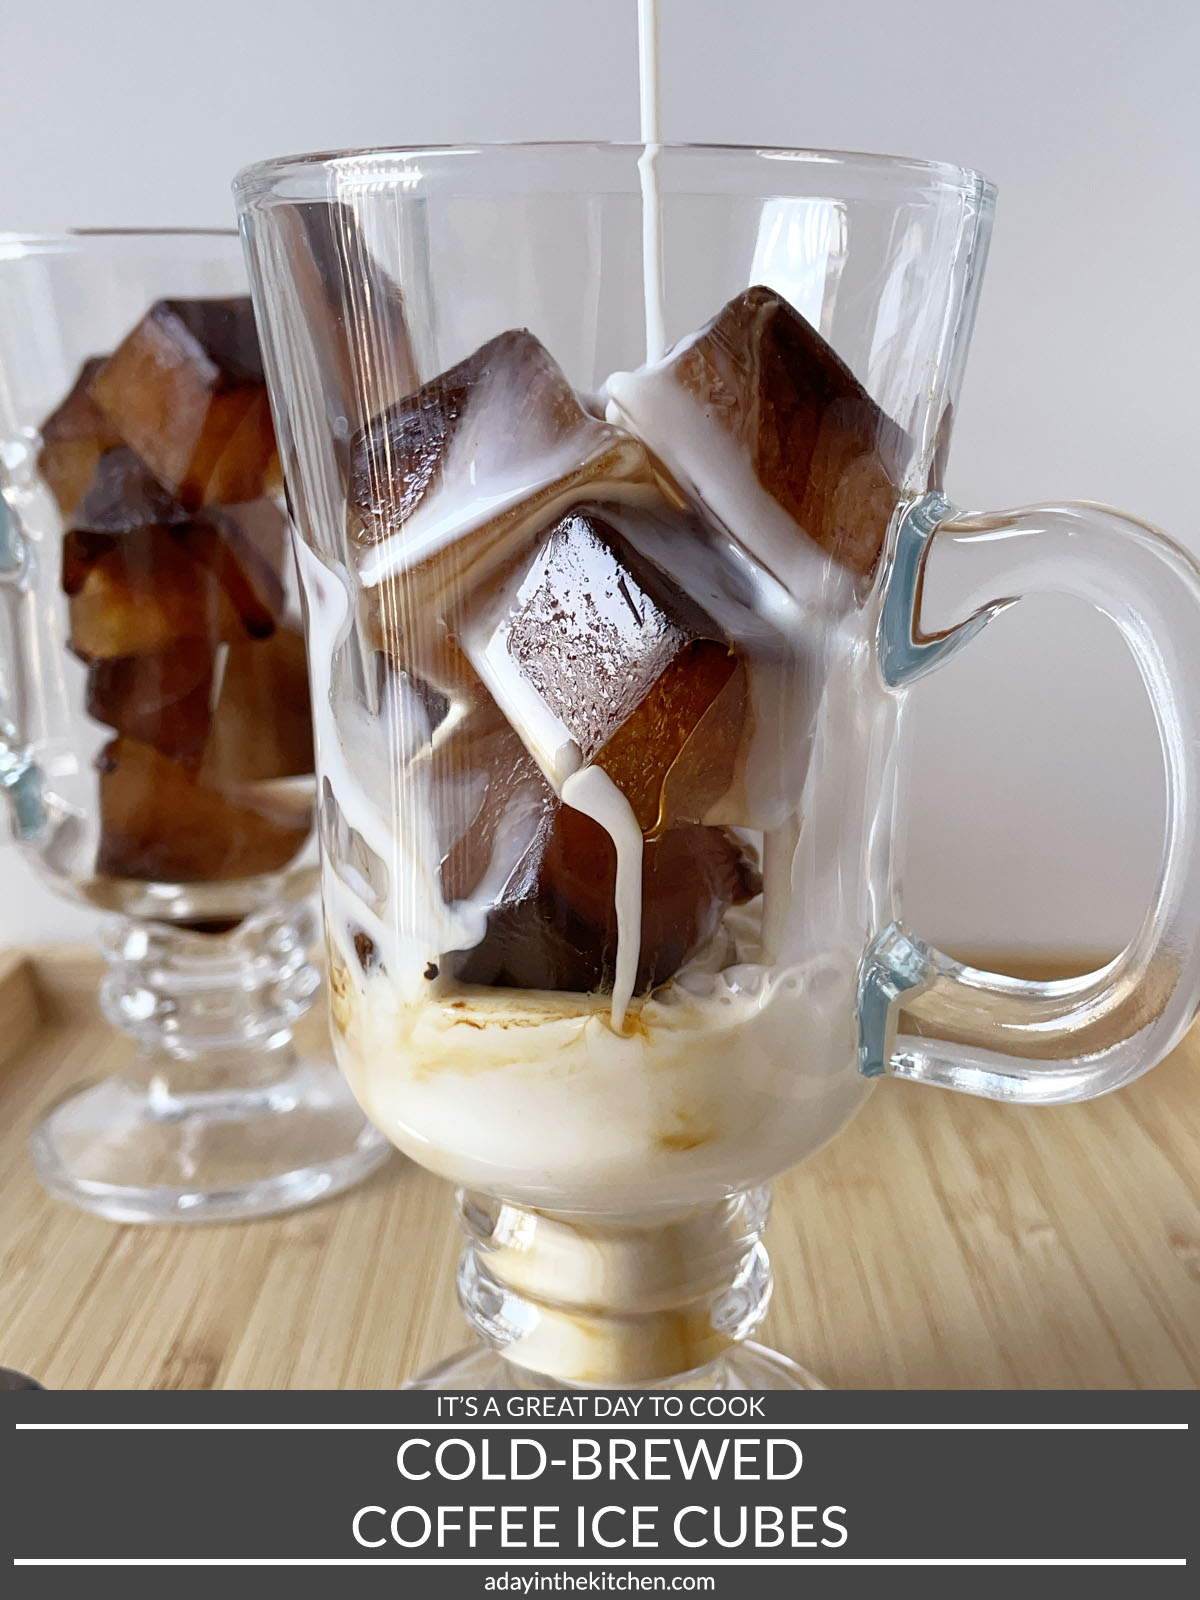 Best Coffee Ice Cubes Recipe - How to Make Coffee Ice Cubes